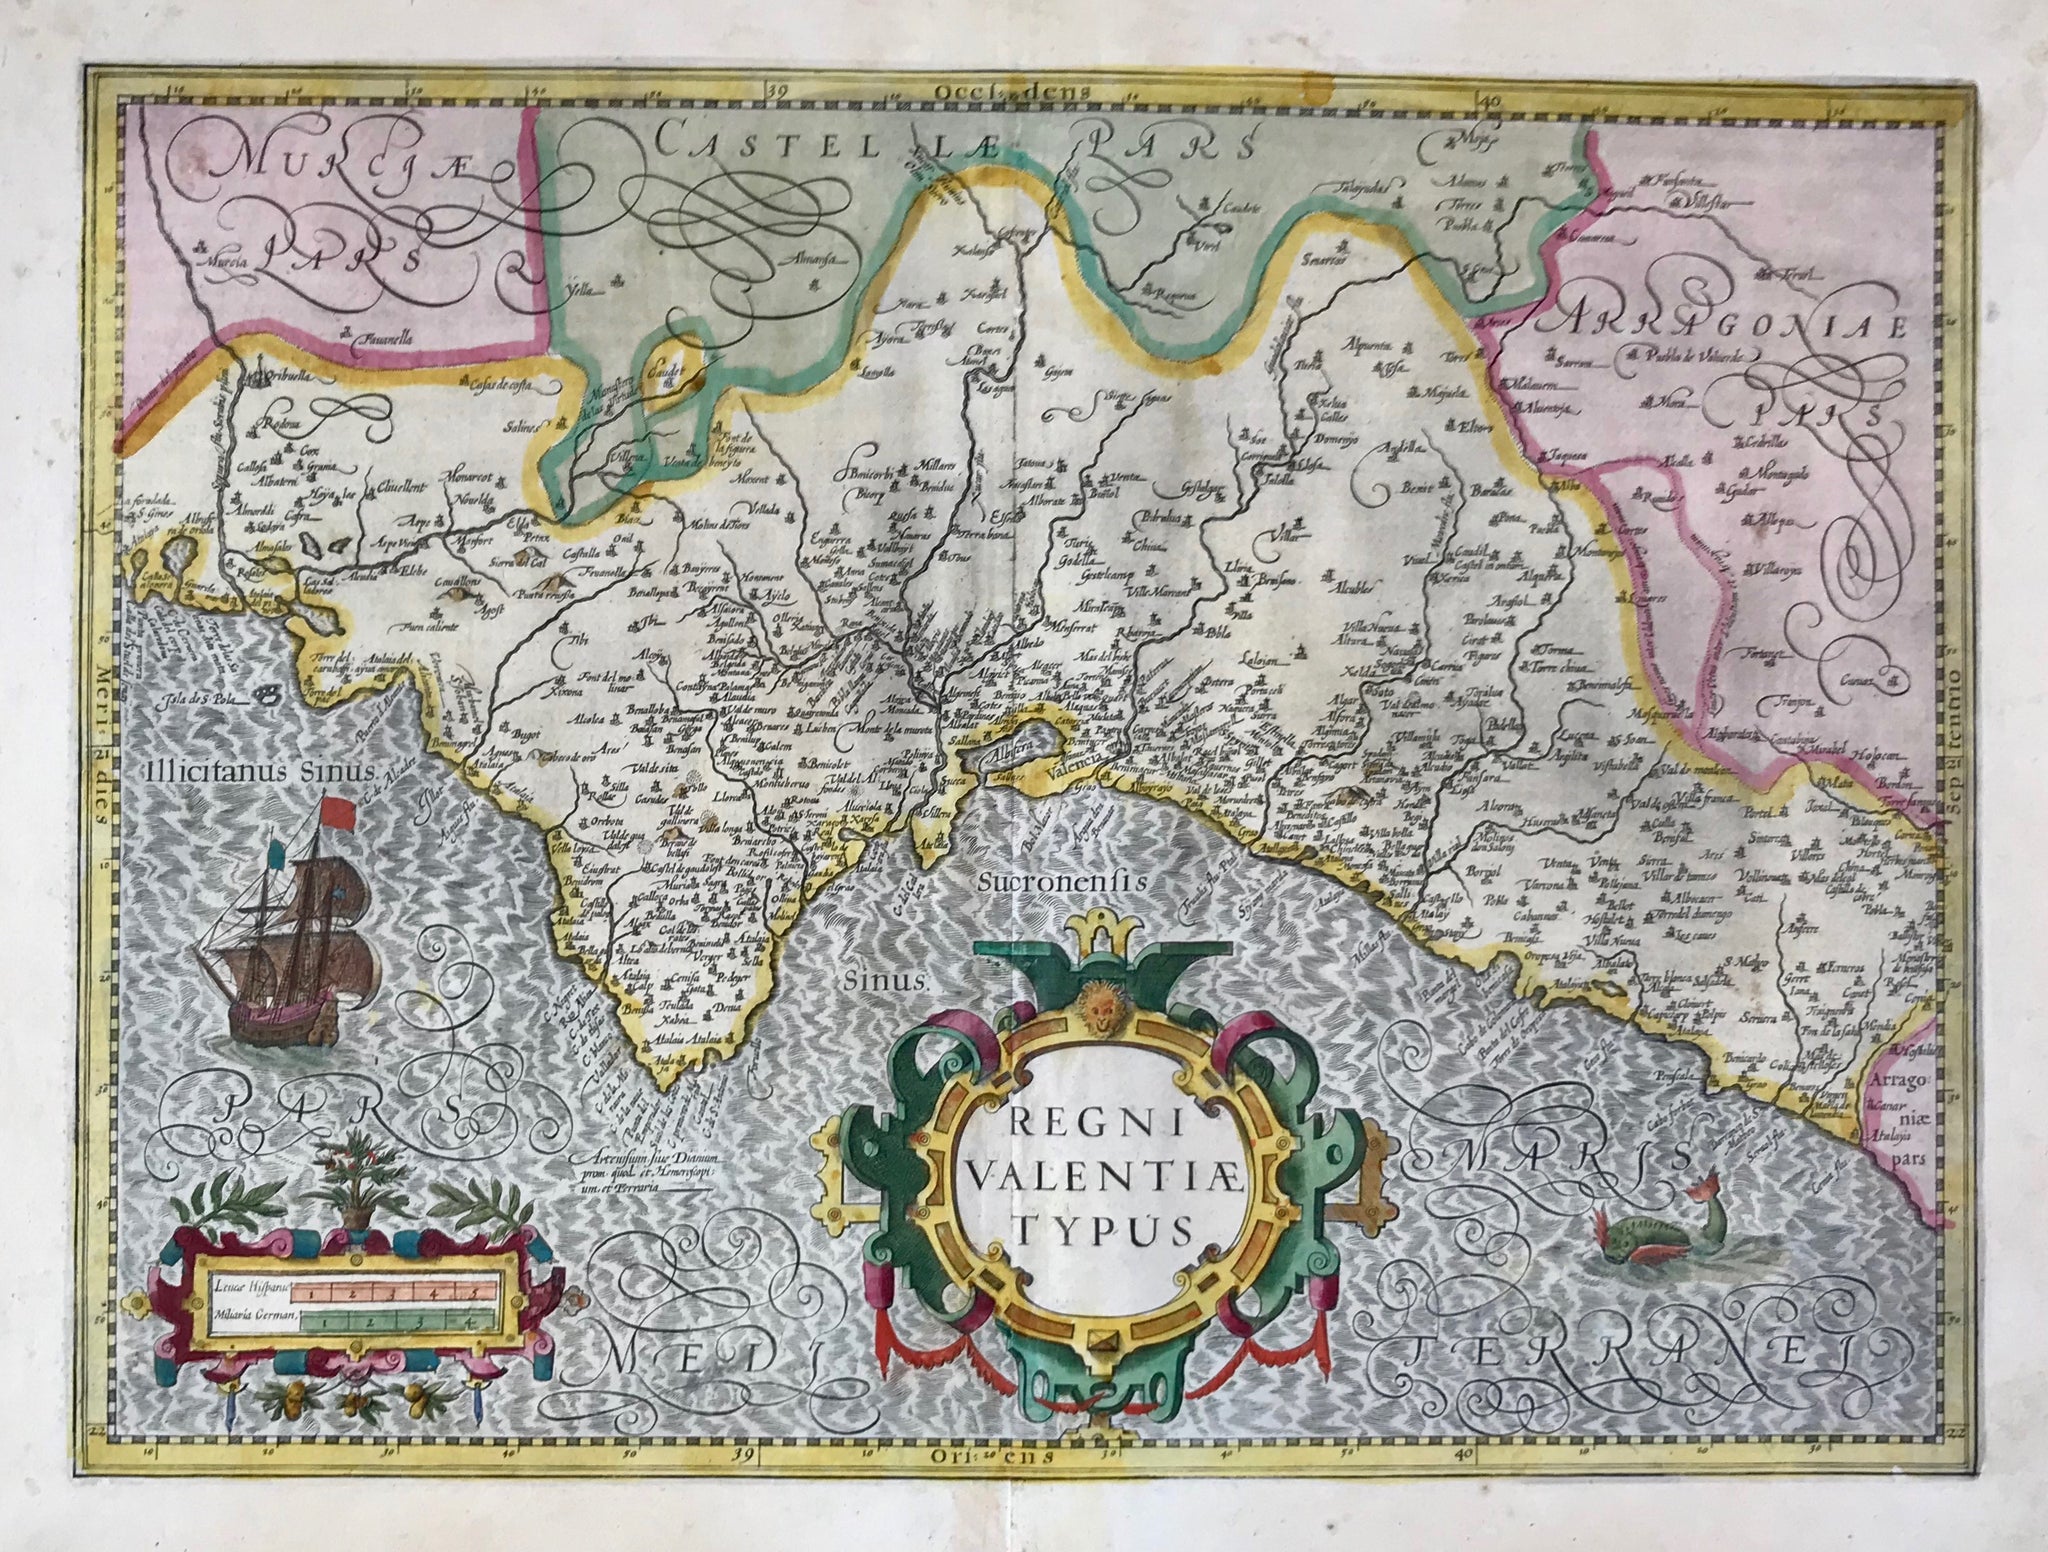 "Regni Valentiae Typus". Province of Valencia, Spain. Copper etching from the atlas by J. Janssonius. Original hand coloring. Amsterdam, ca. 1650.  Map shows coastline of the province of Valencia and the hinterland. Two decorative cartouches, ship and sea monster. Riverse side text in German.